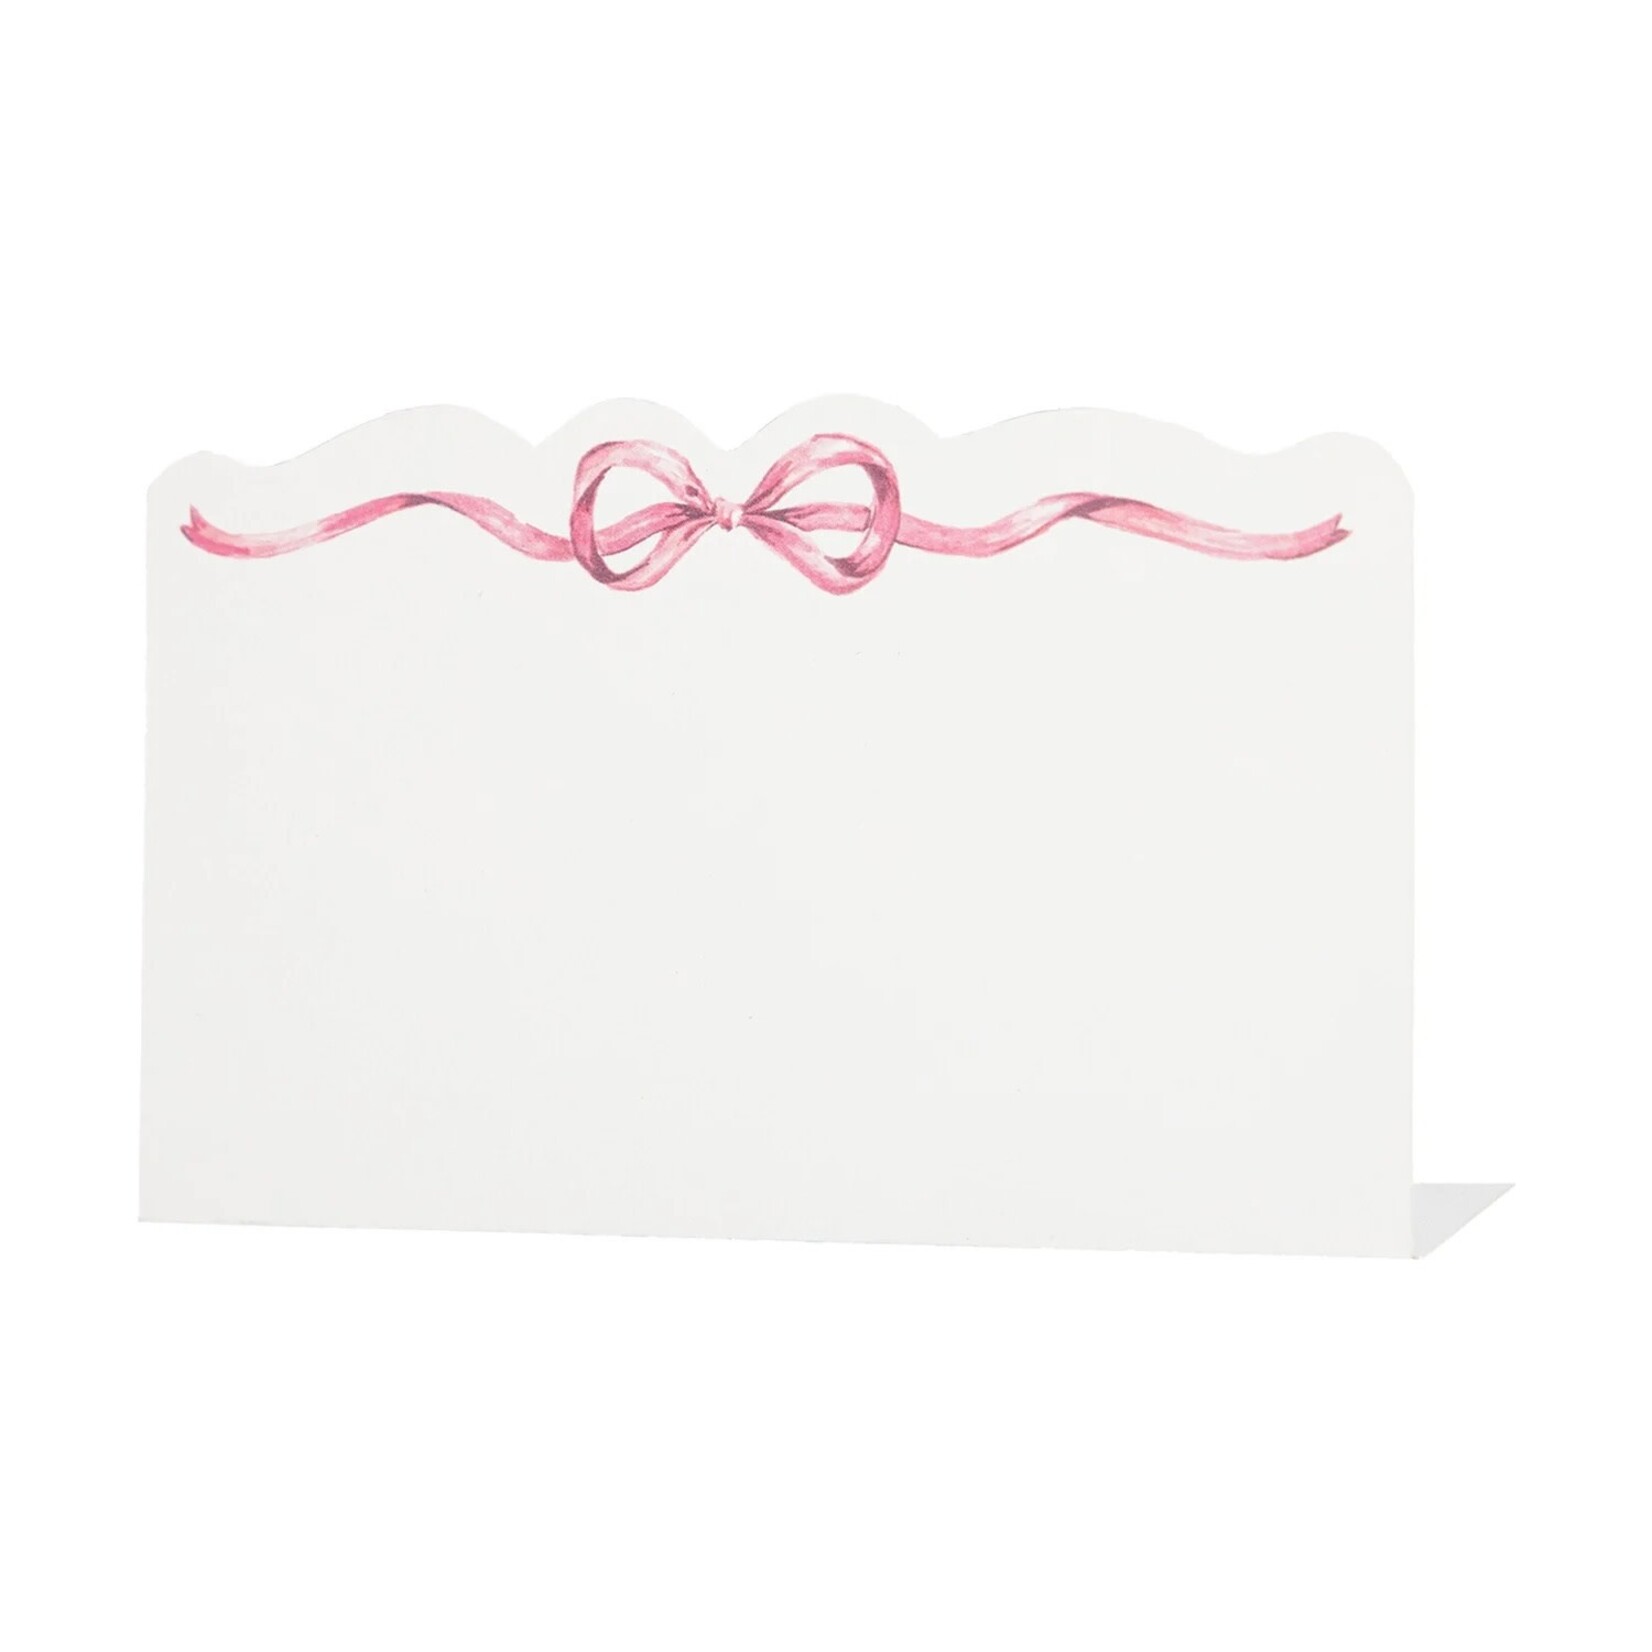 Hester & Cook Pink Bow Place Card